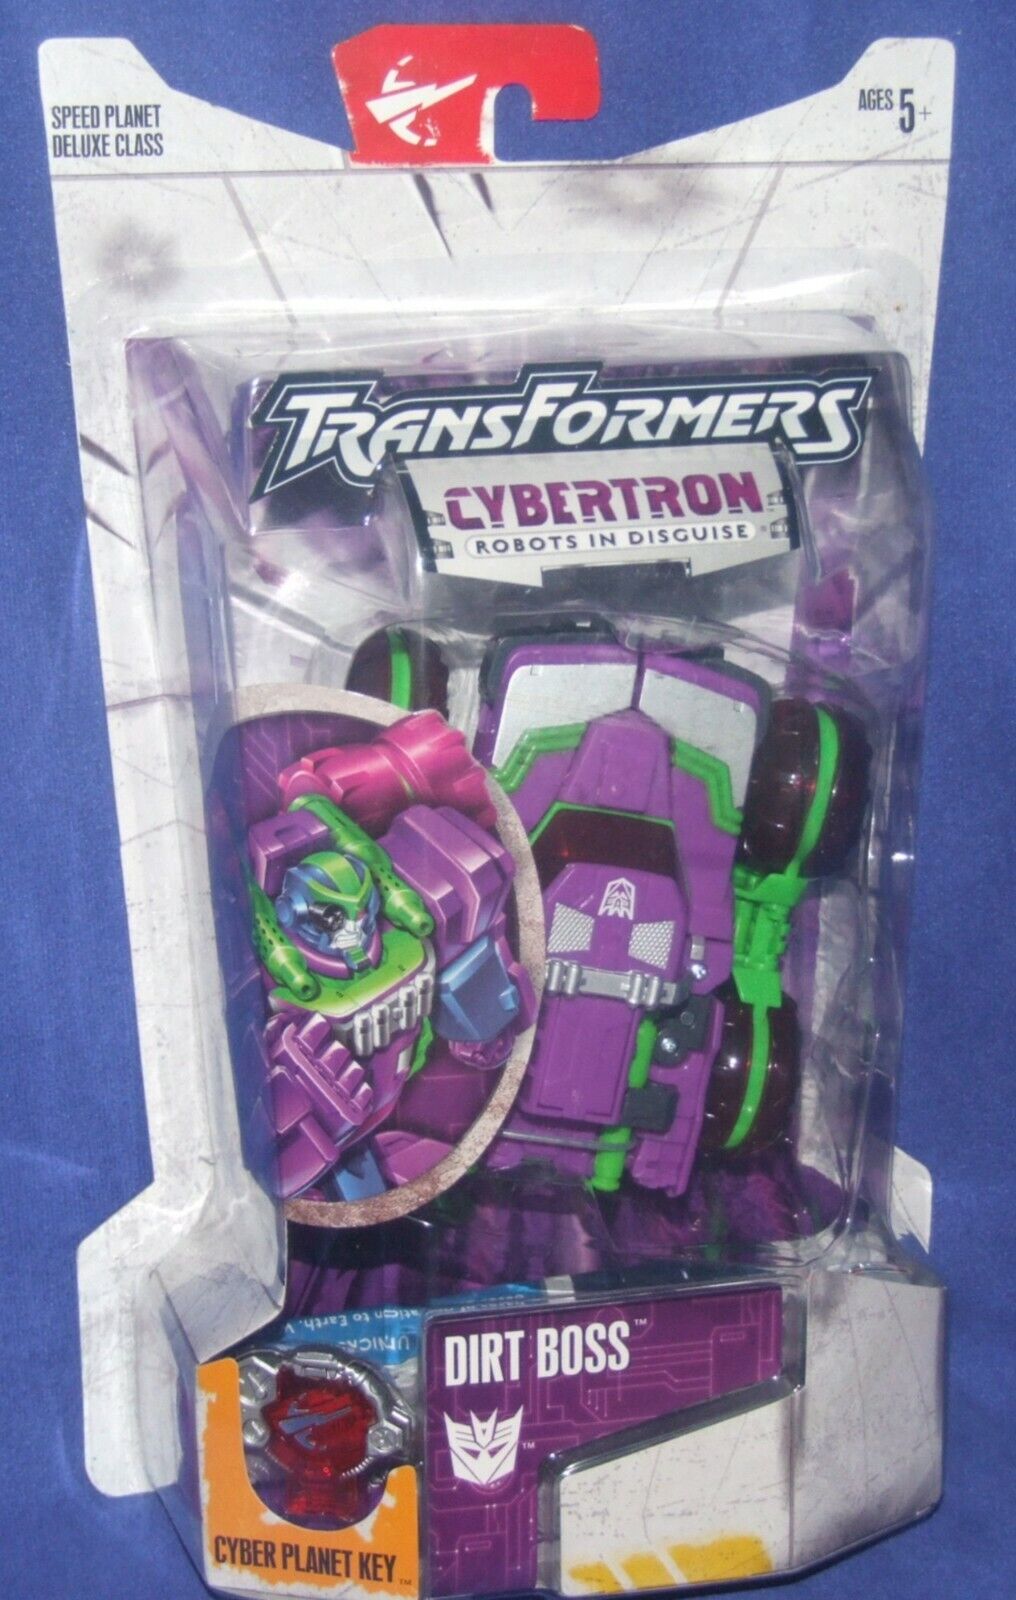 Transformers Cybertron Dirt Boss with Cyber Plant Key New Factory Sealed 